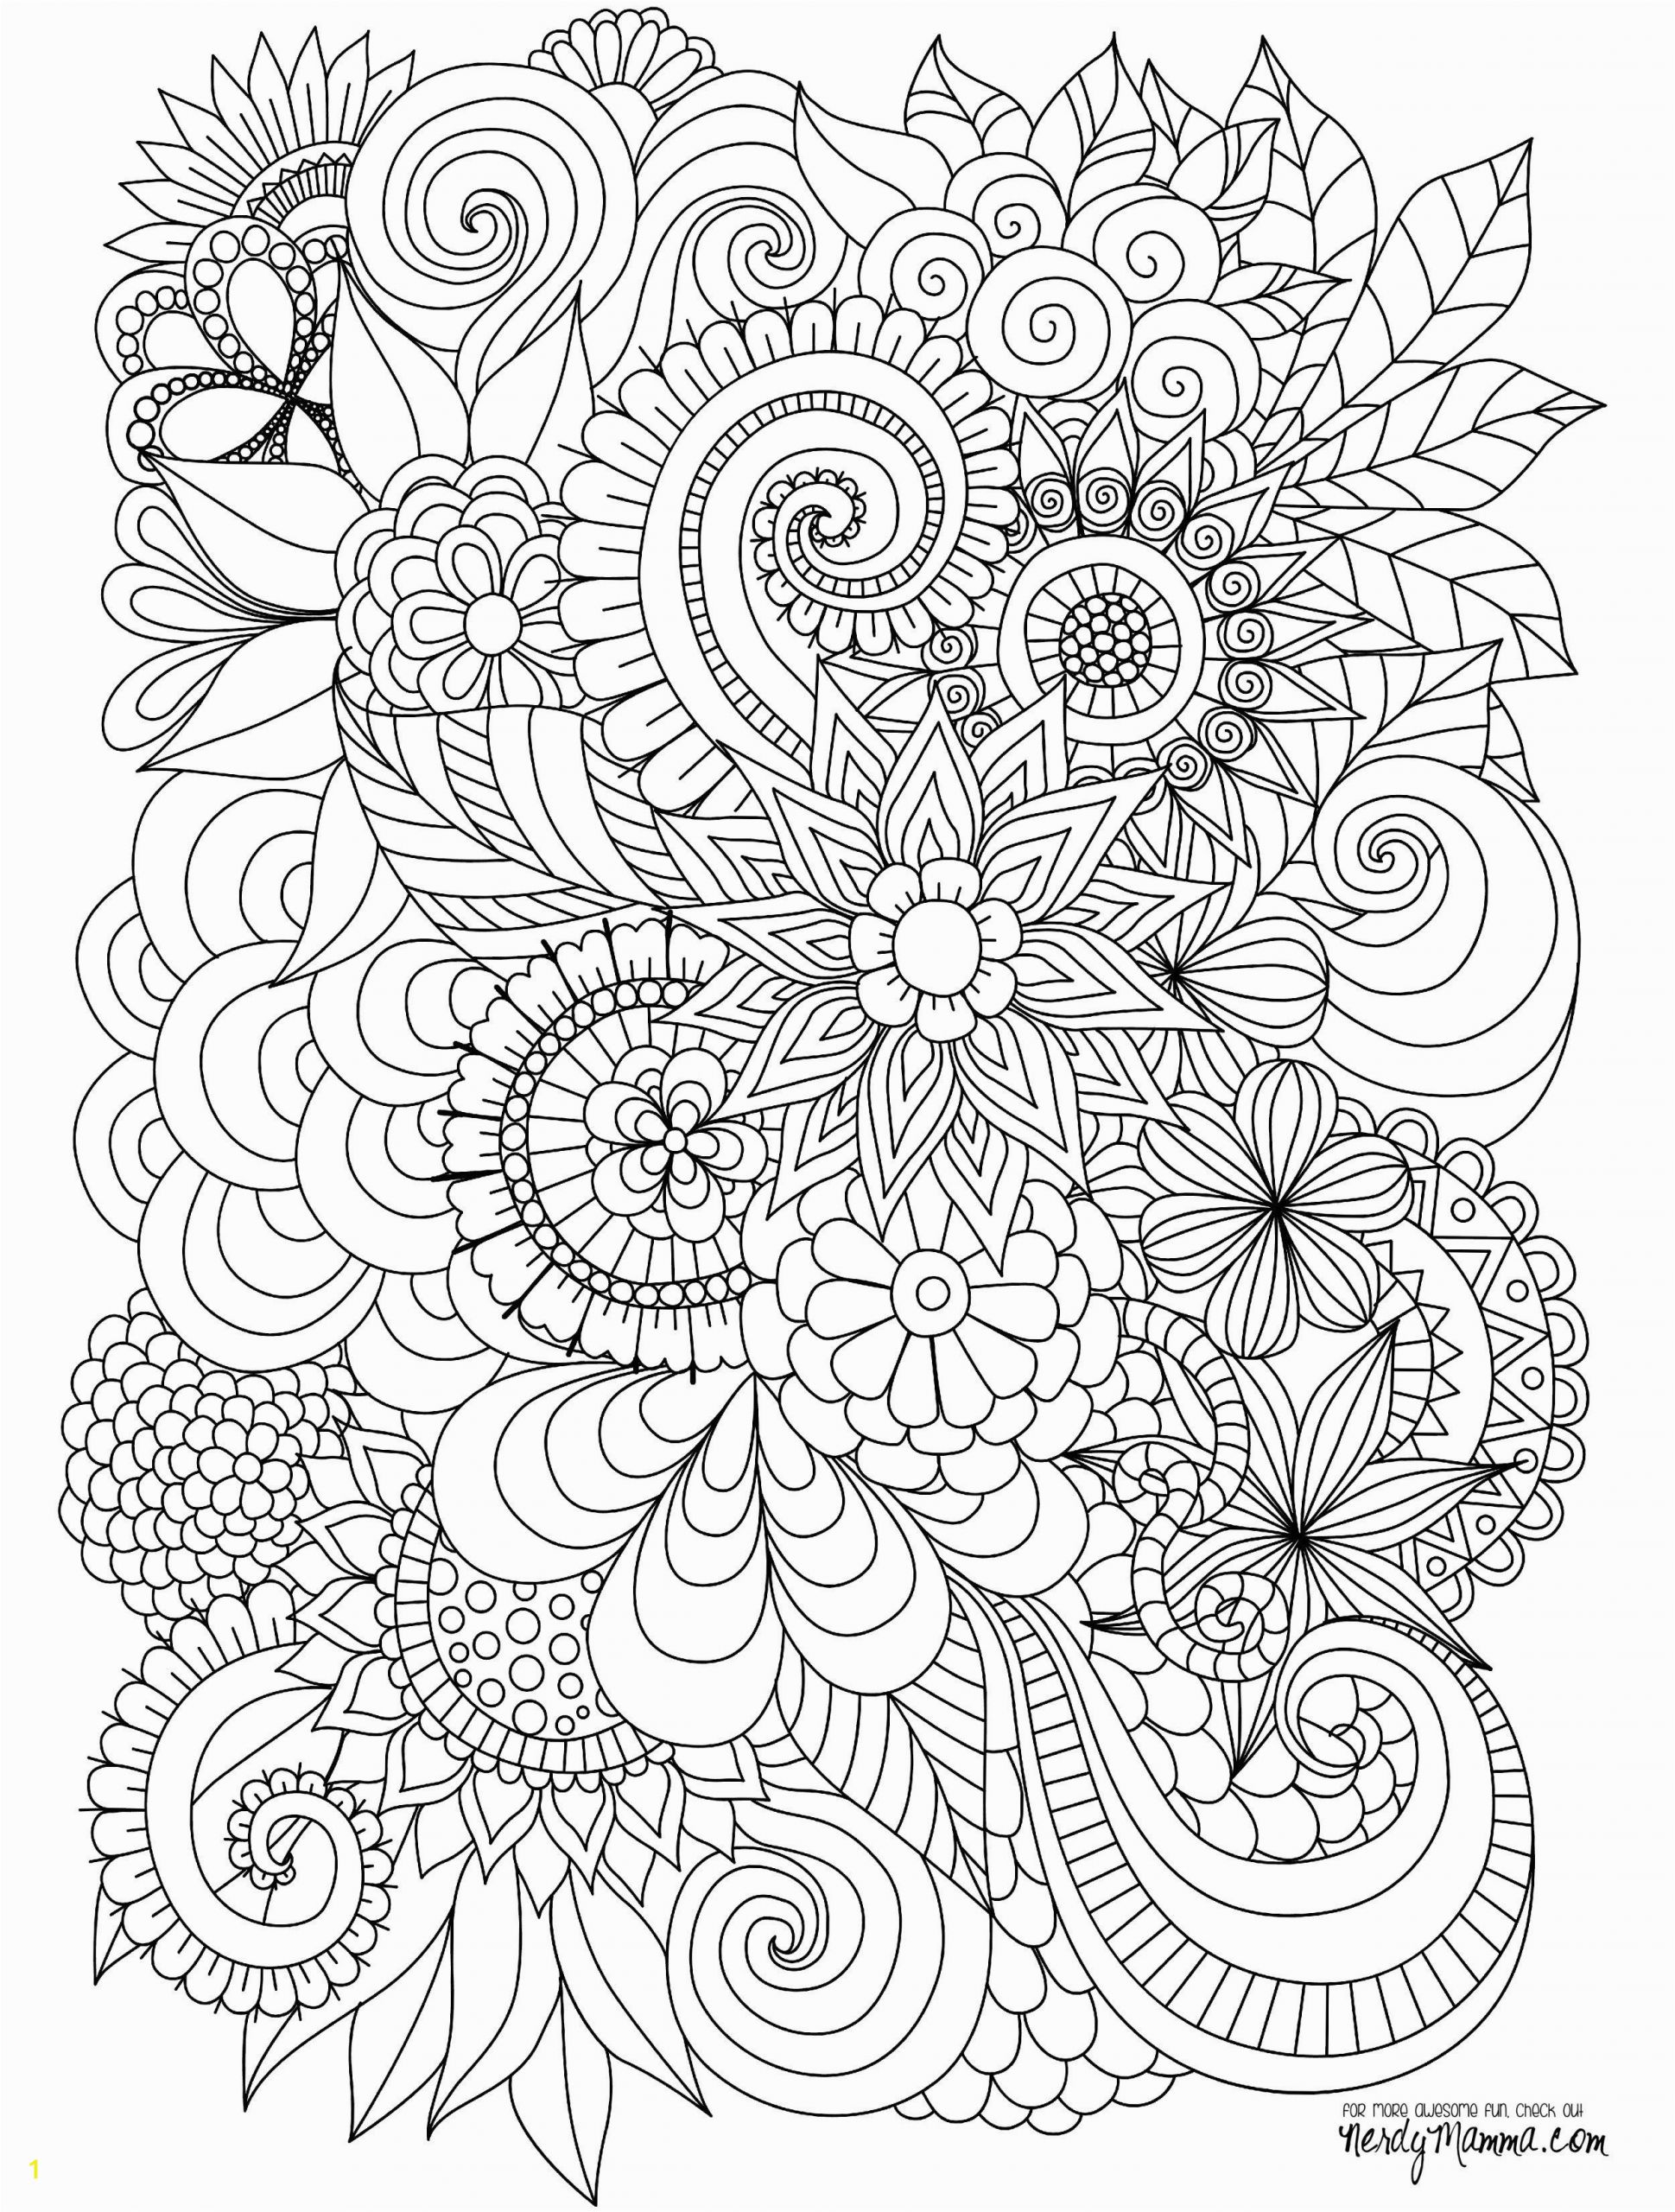 Free Coloring Pages for Adults Printable Hard to Color 11 Free Printable Adult Coloring Pages with Images